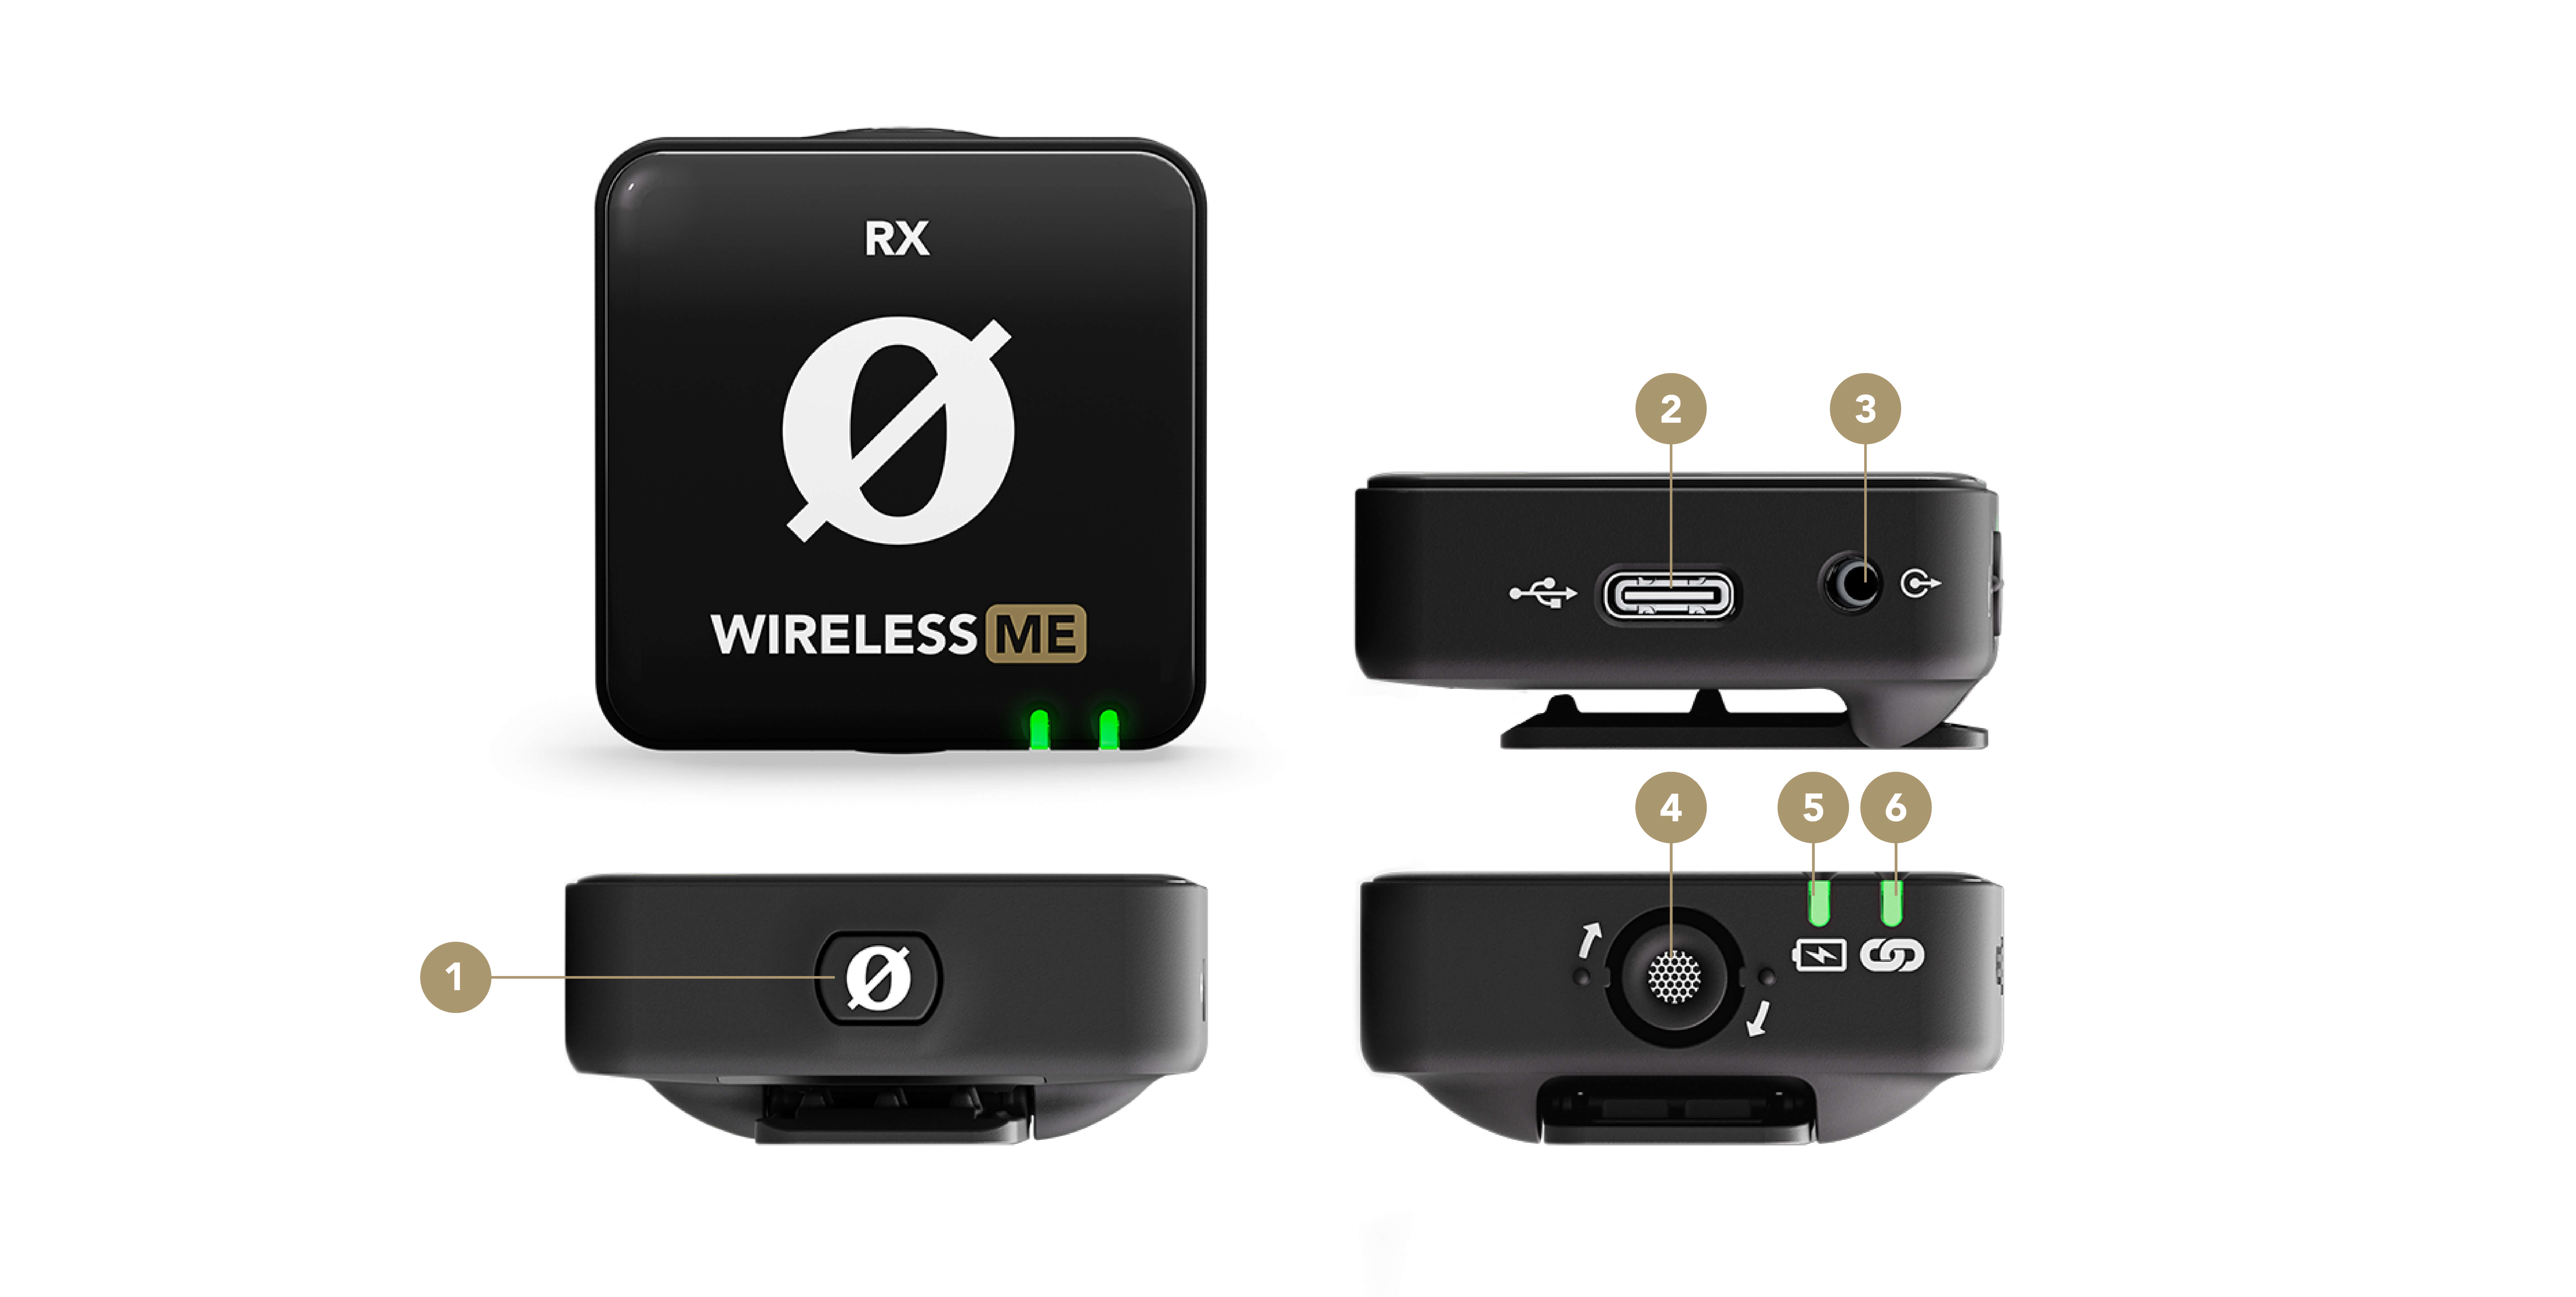 Wireless ME RX feature points